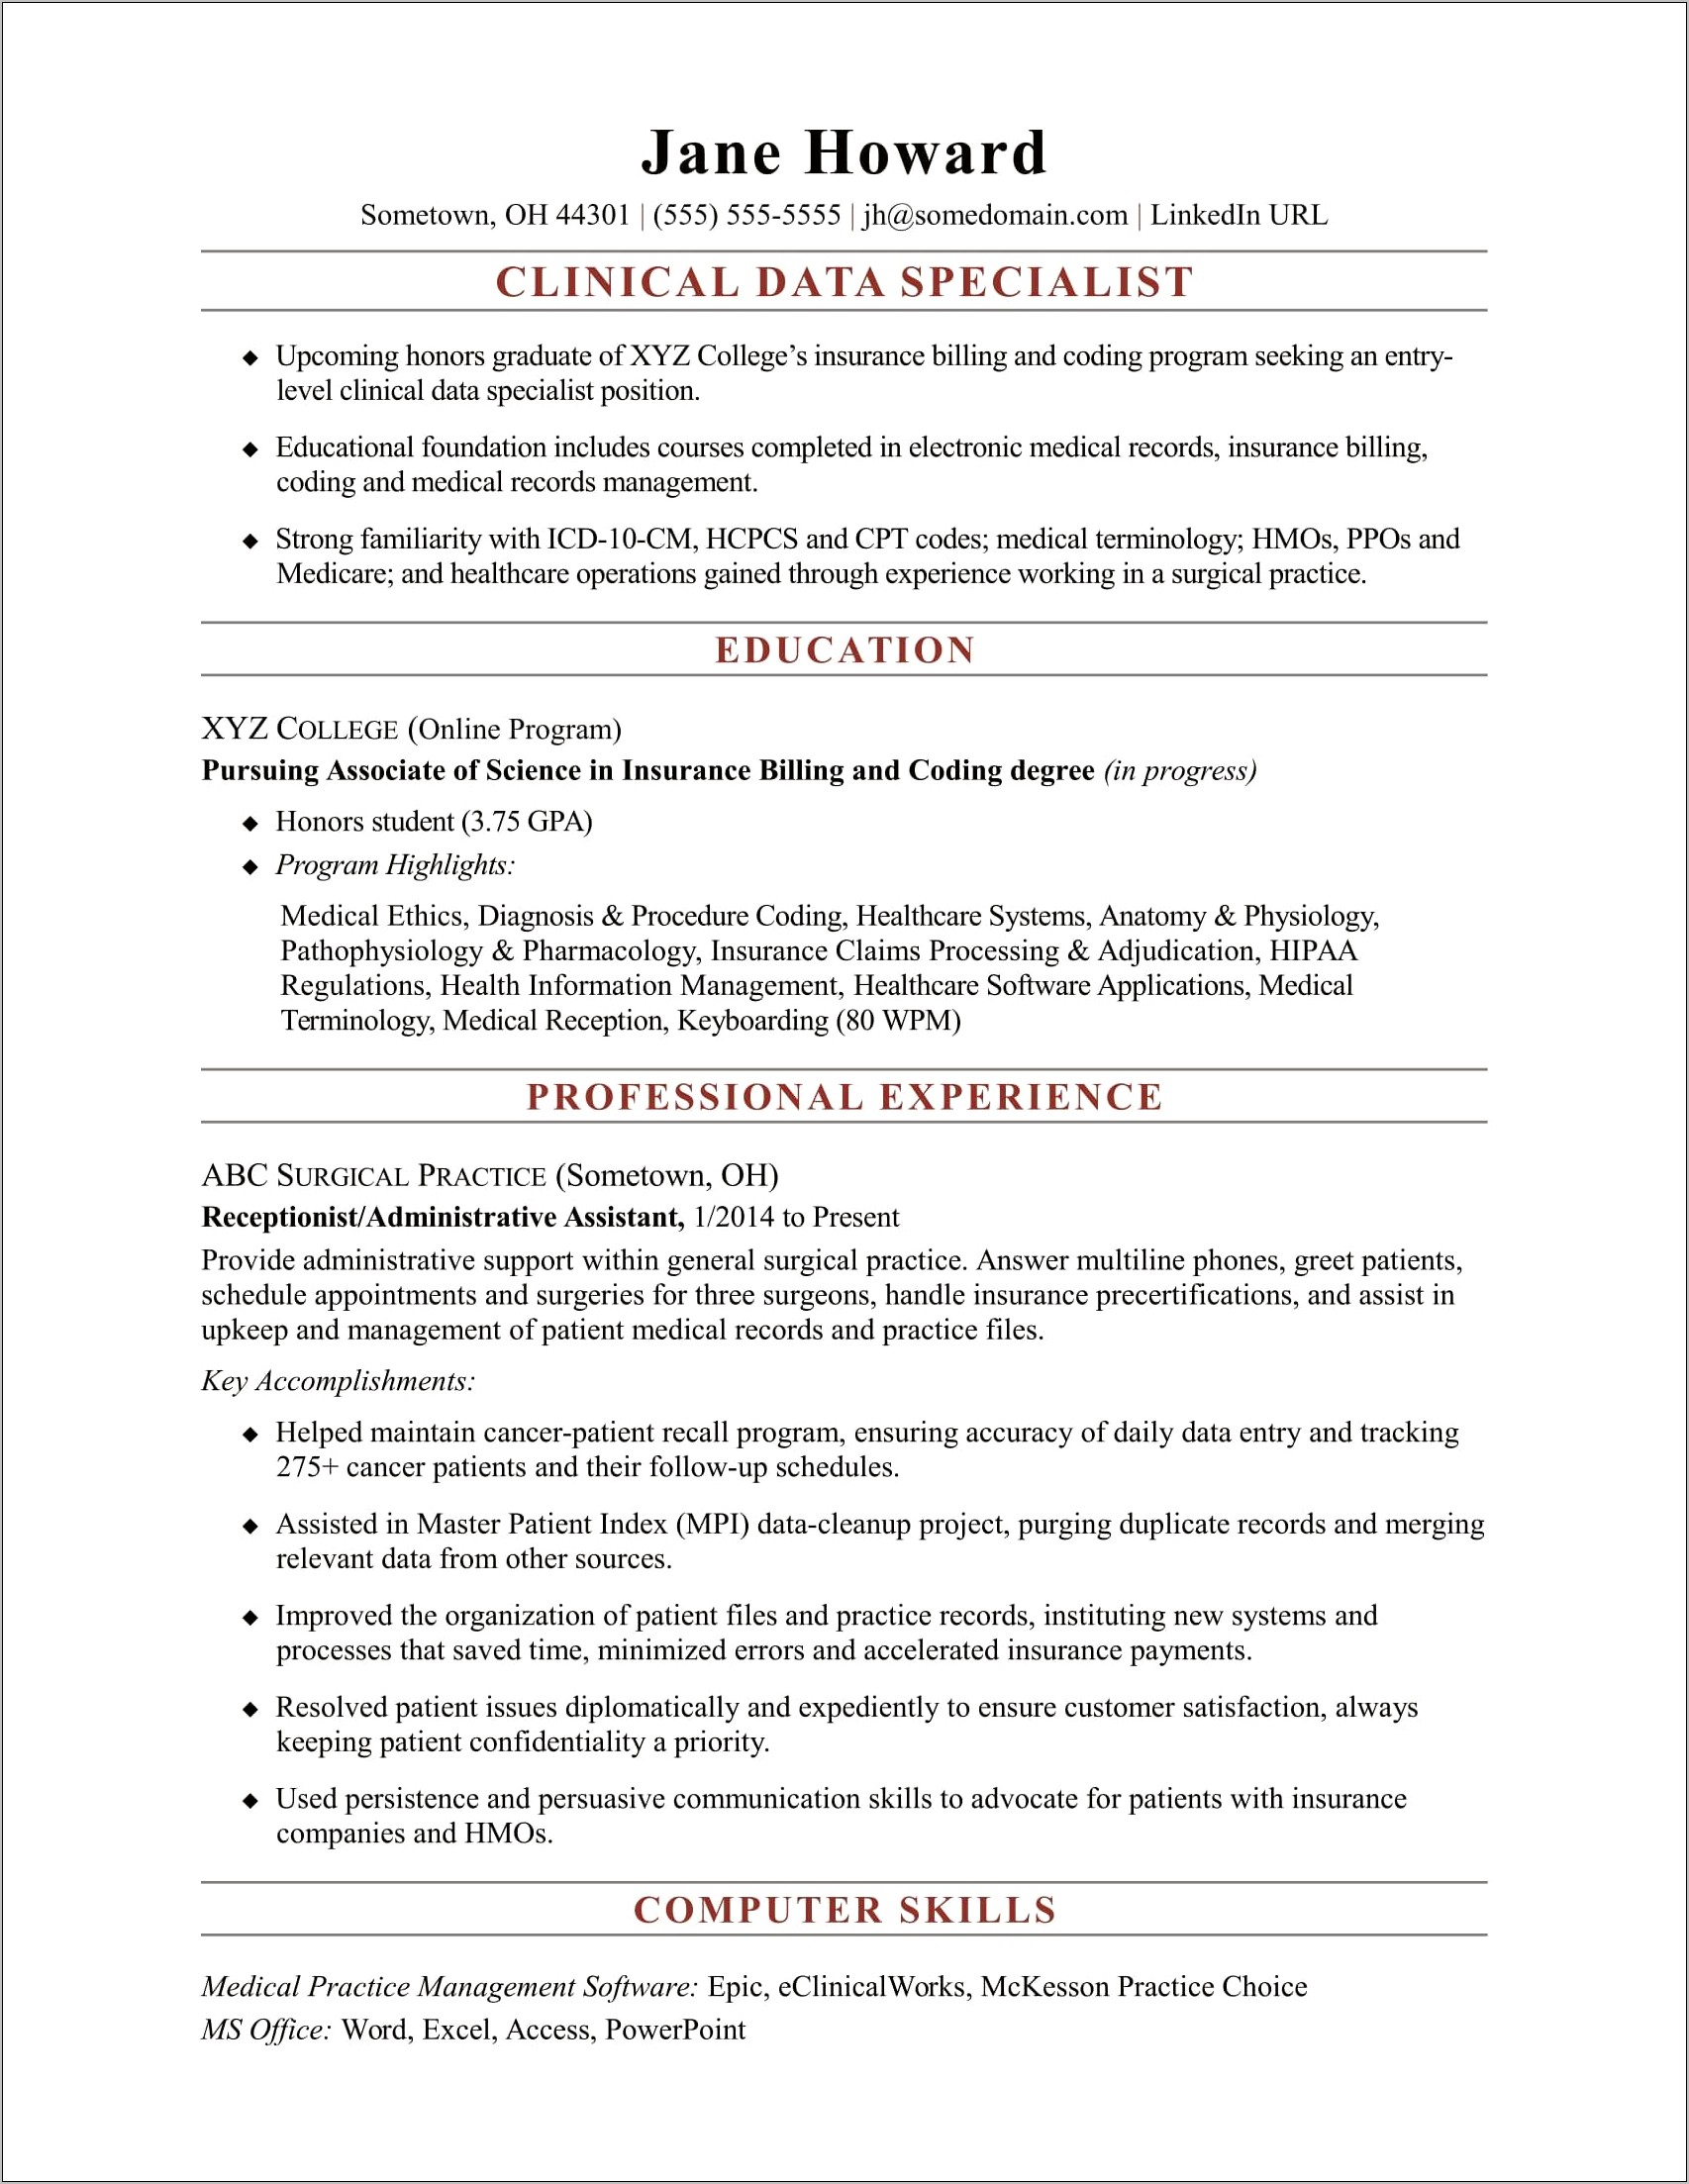 Job Placement Specialist Sample Resume